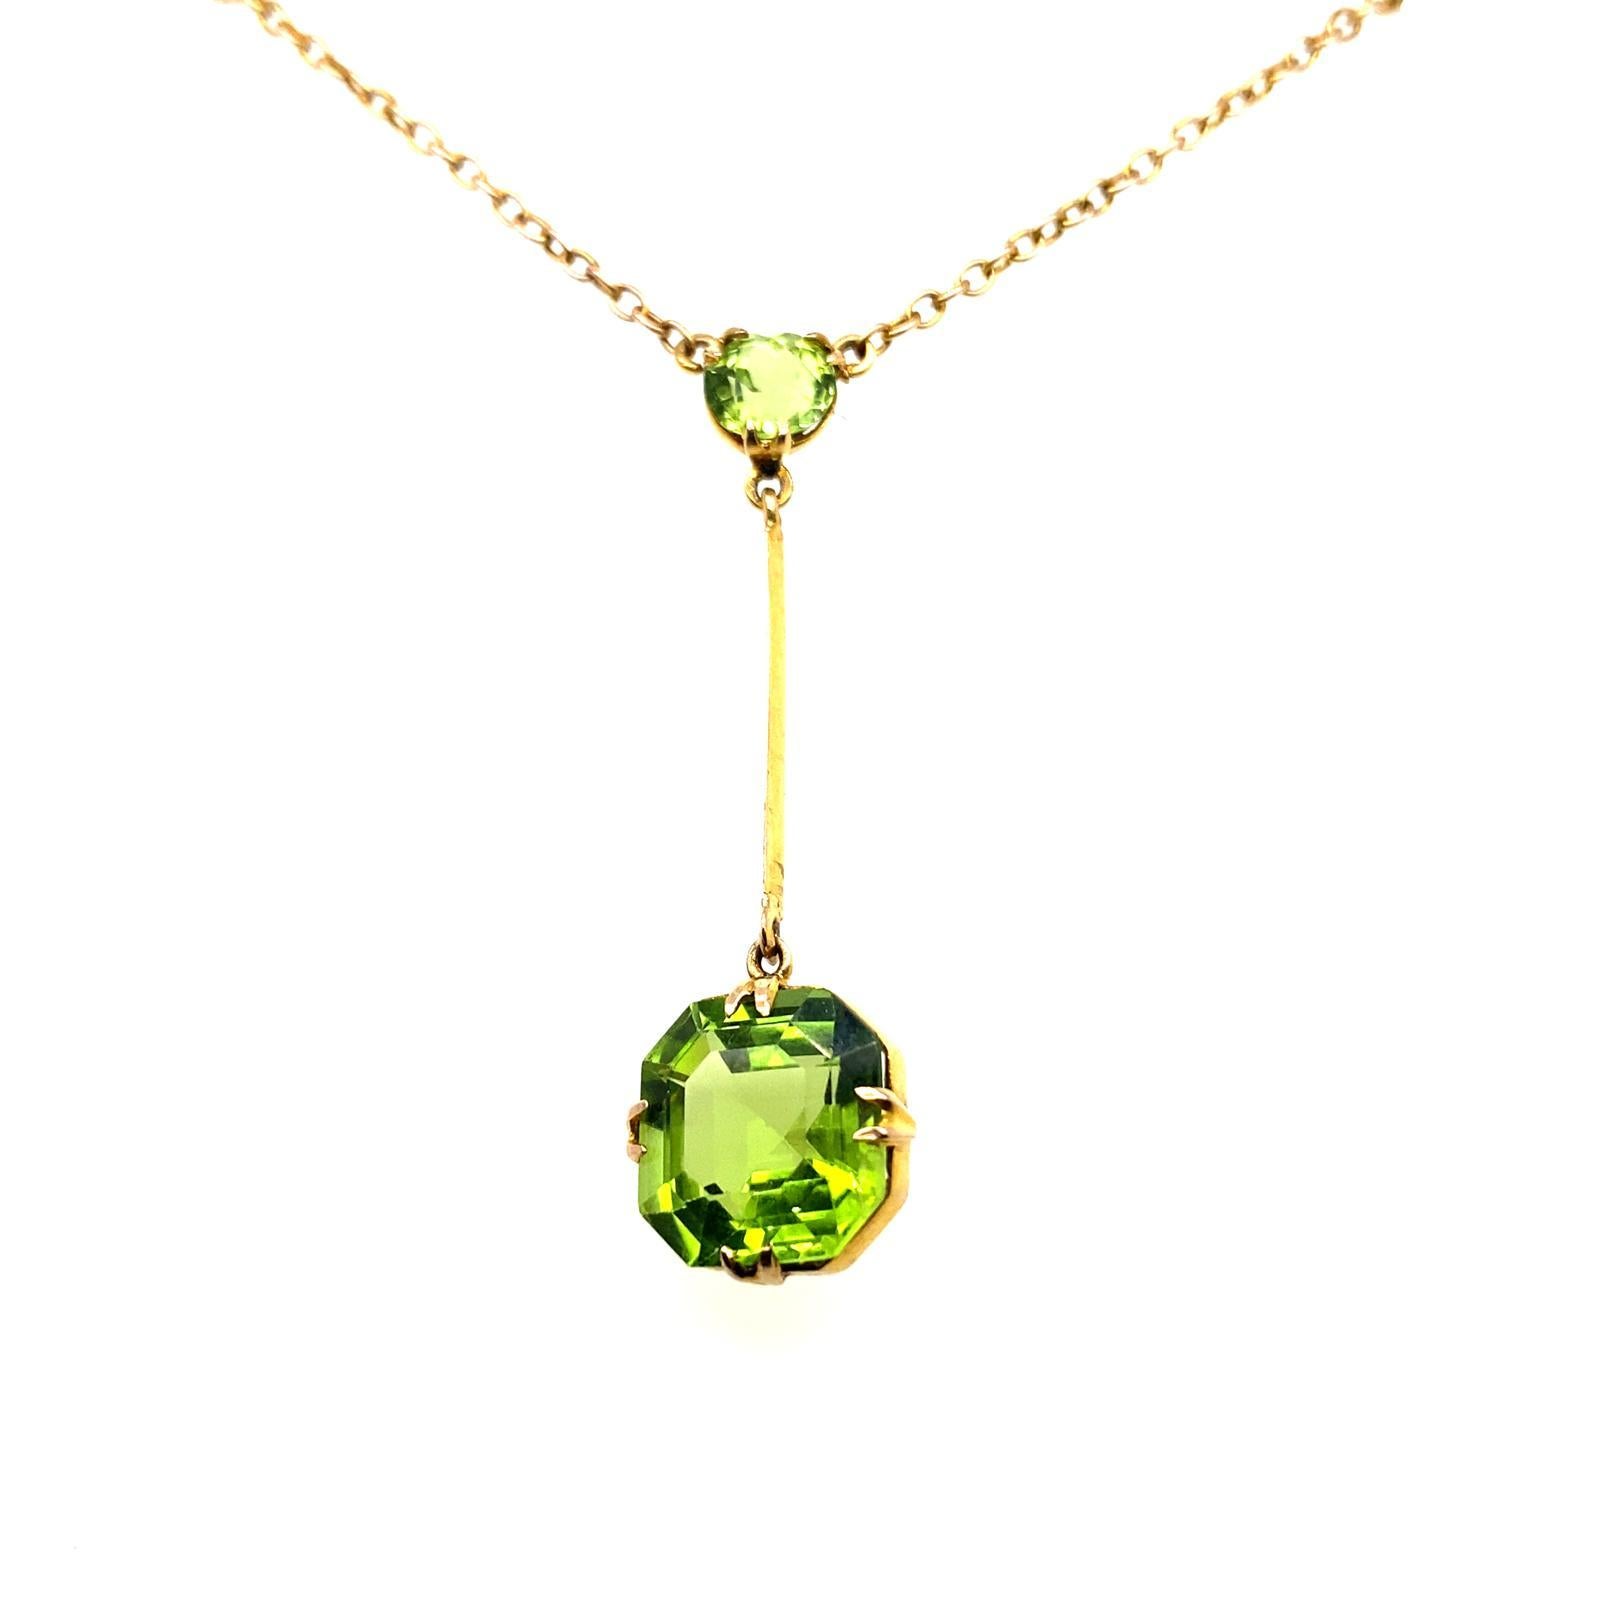 An Edwardian Peridot Pendant Necklace in 9 Karat Yellow Gold.

This pretty pendant is set to its centre with a round cut periodot of 0.95 carats approximately within a claw setting from which suspends a larger lively green square cut peridot of 4.97